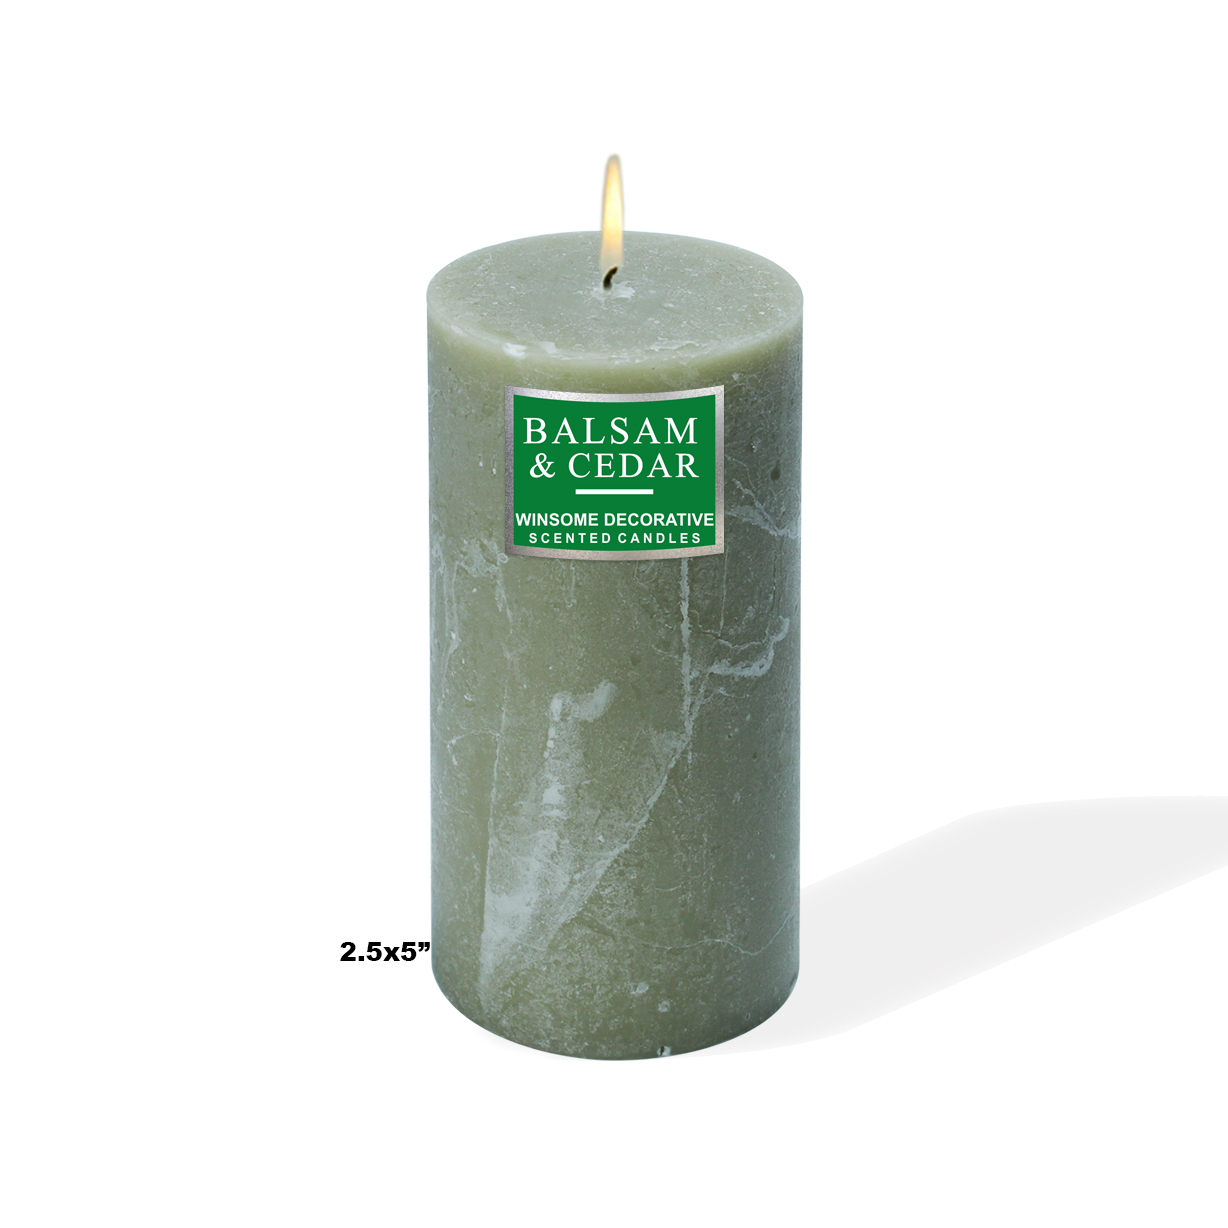 Winsome Decorative -Rustic Pillar Candle – Perfect for Home Decoration, Festivals, Occasions and Events – Purely Handcrafted by Indian Artisan – SKU # 102